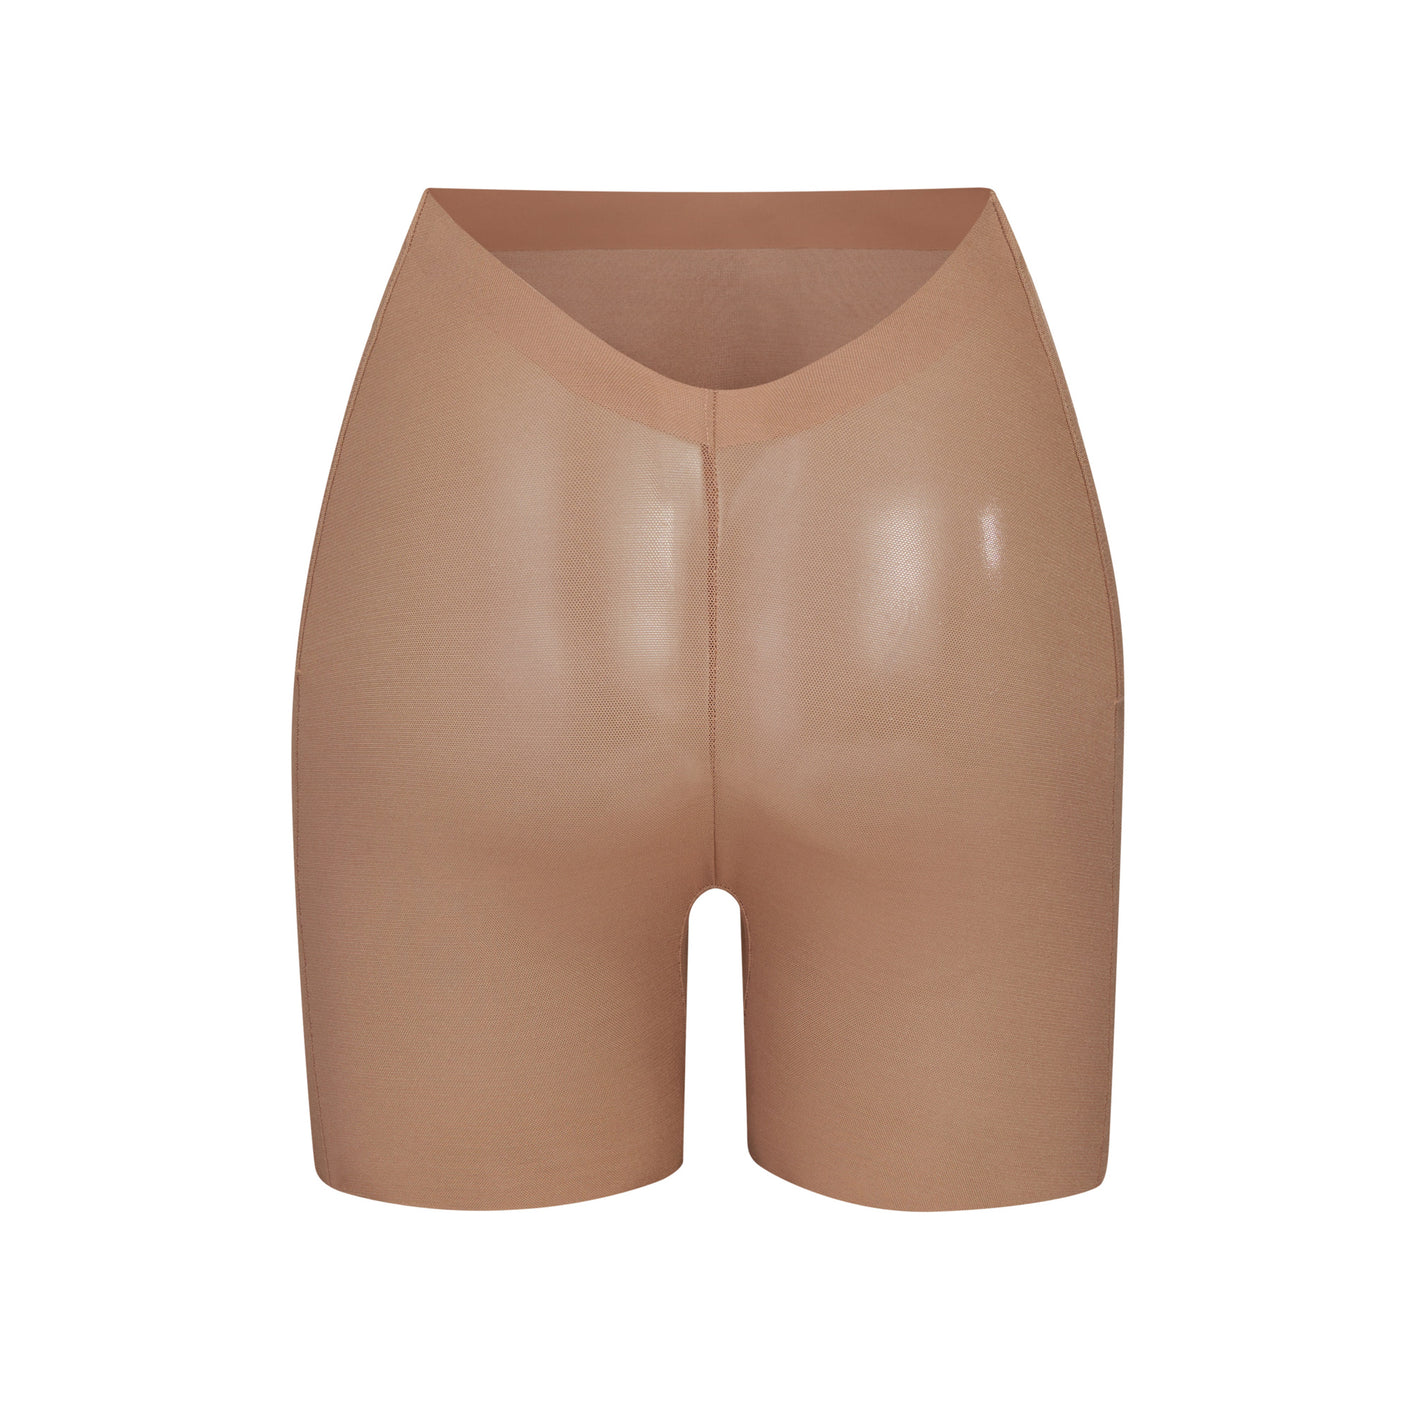 I'm a Skims fan – I tried the Barely There backless shorts, I am  'obsessed', they're a must-have summer staple